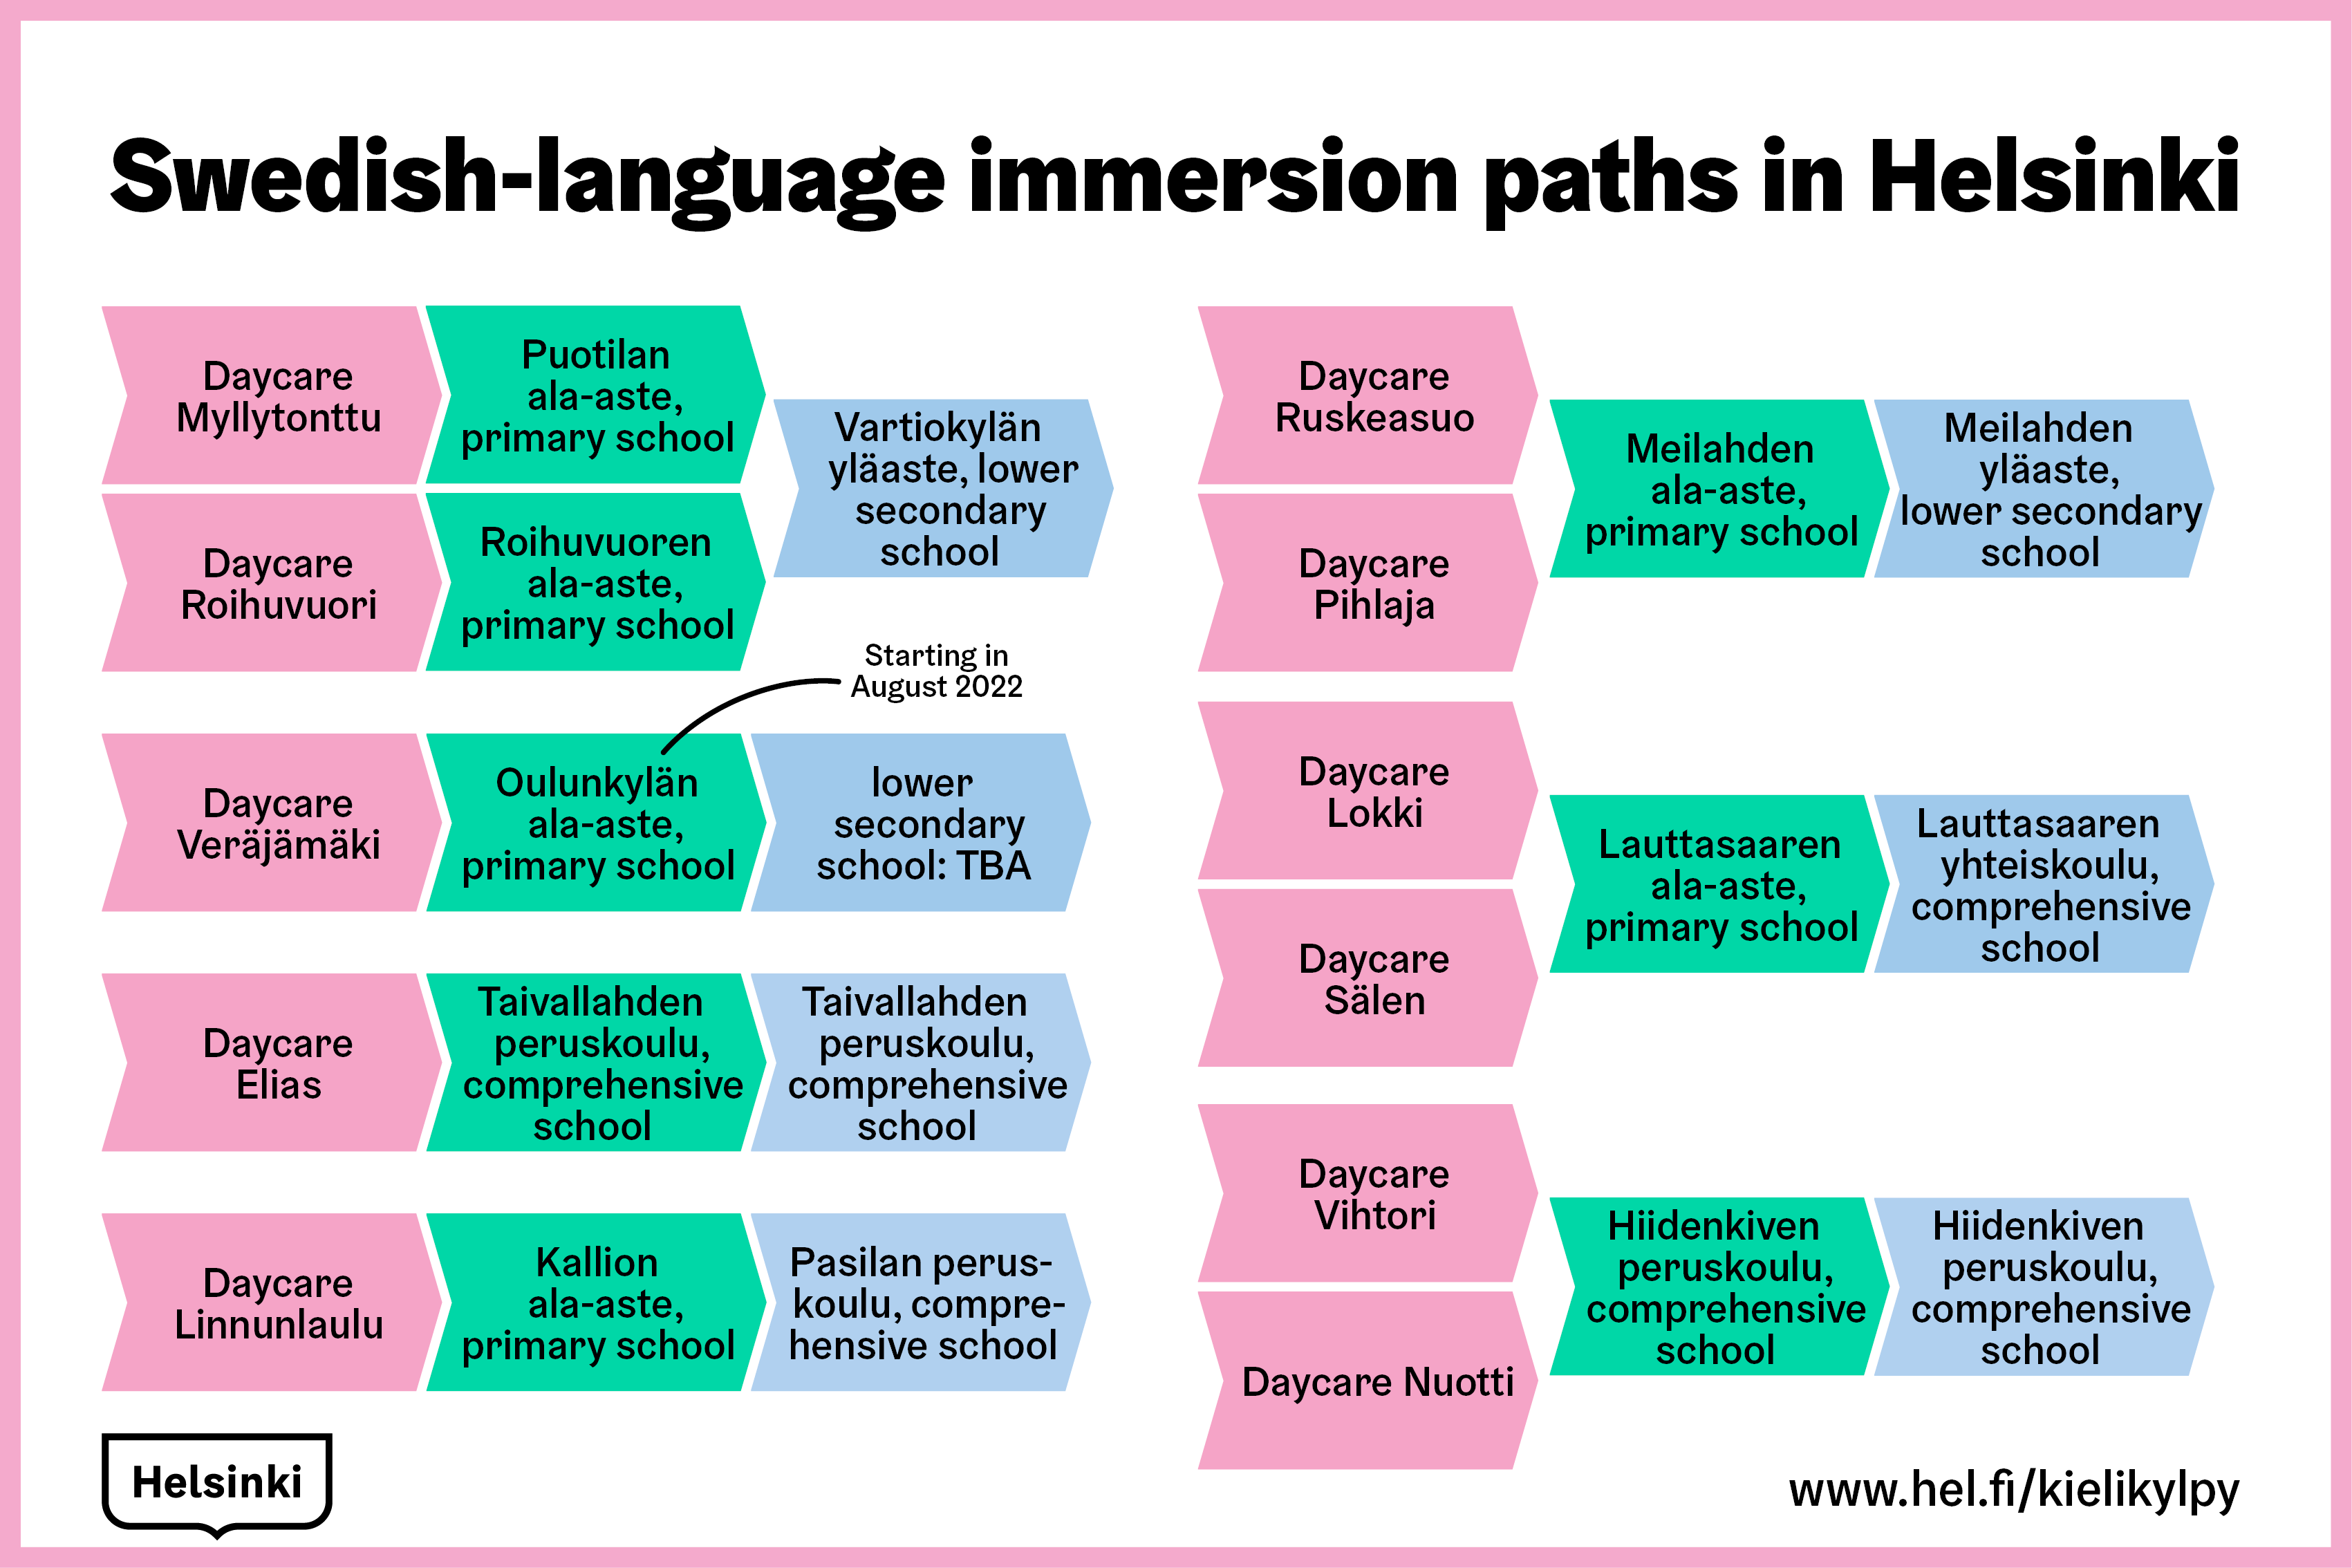 Swedish-language immersion paths in Helsinki start from daycare and continue up to grade 9 in basic education.